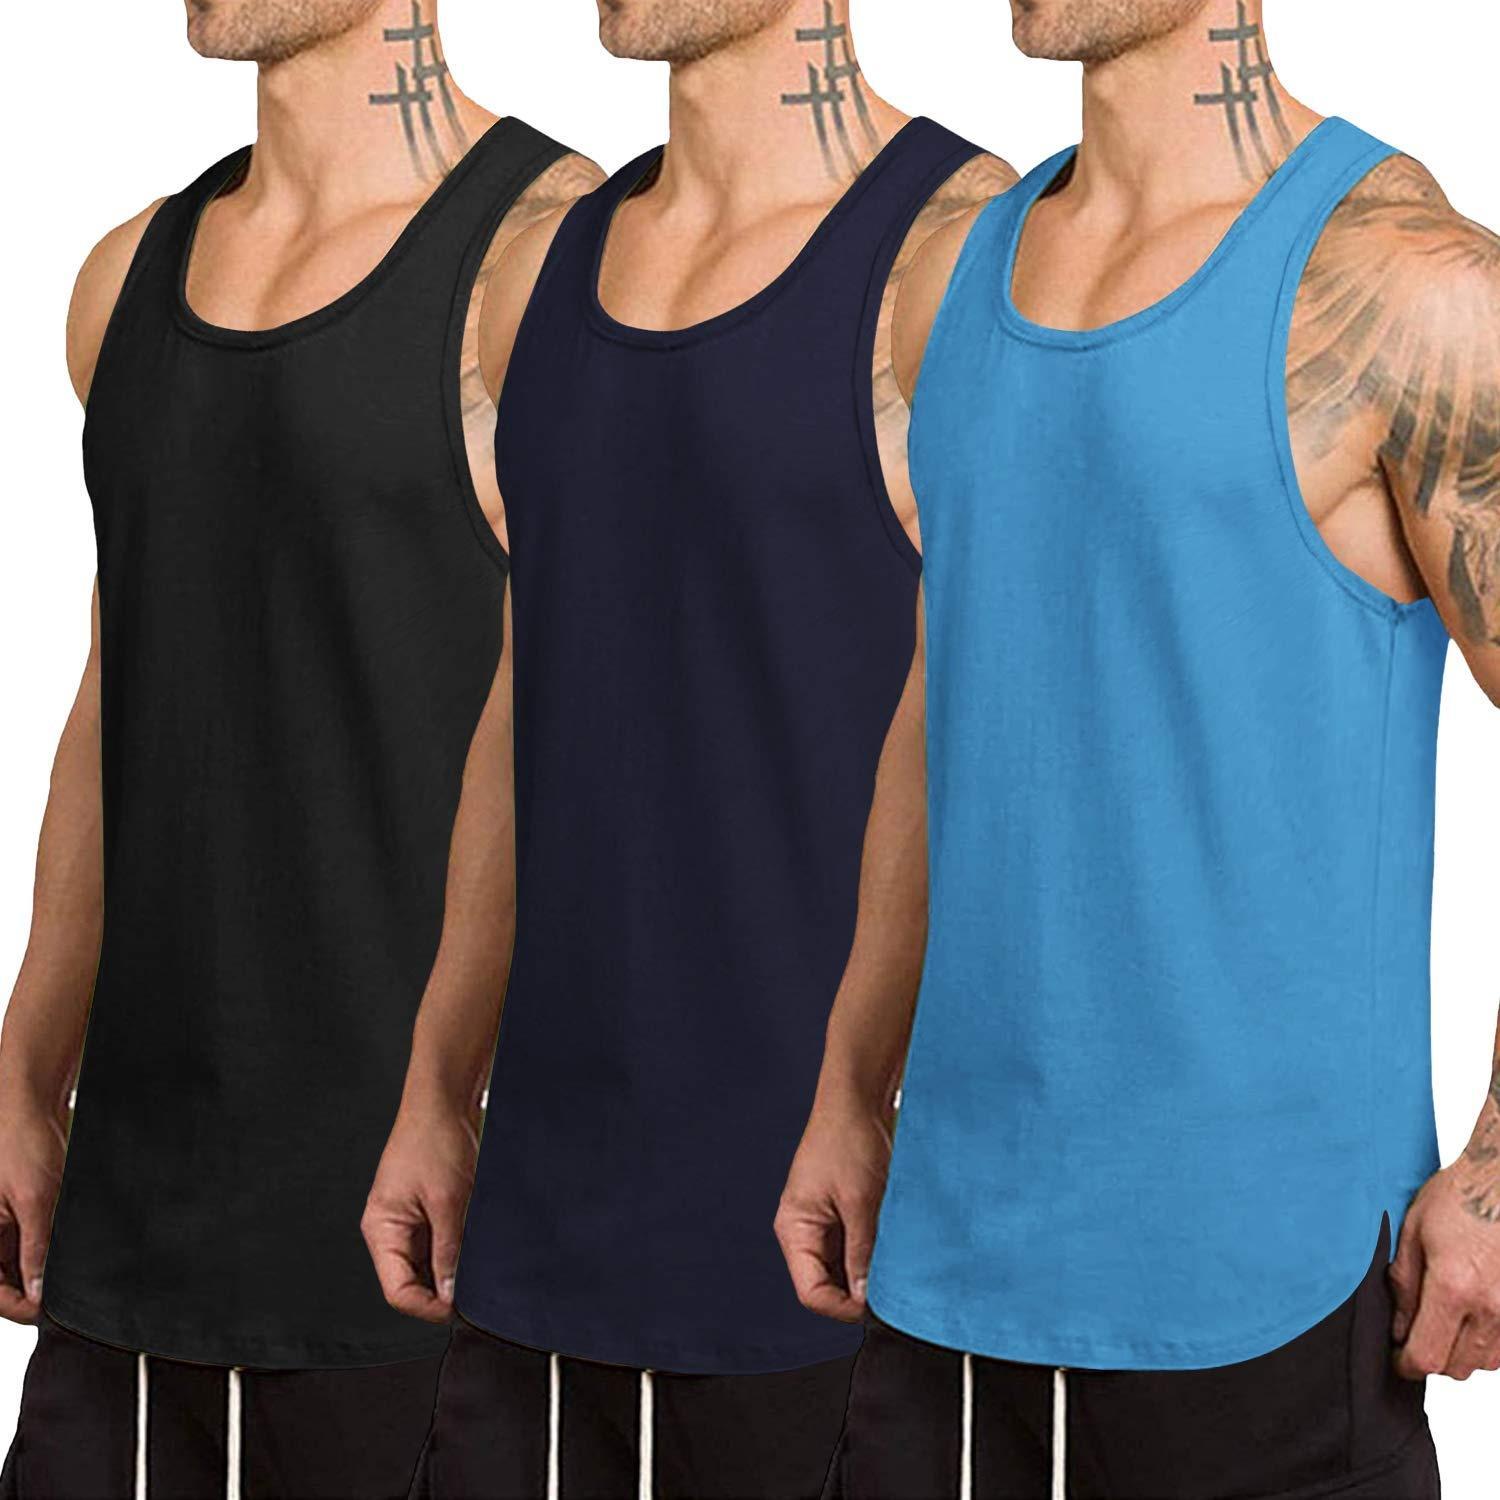 

Men's 3 Pack Quick Dry Workout Tank Top Gym Muscle Tee Fitness Bodybuilding Sleeveless T Shirt Breathable Tank Top